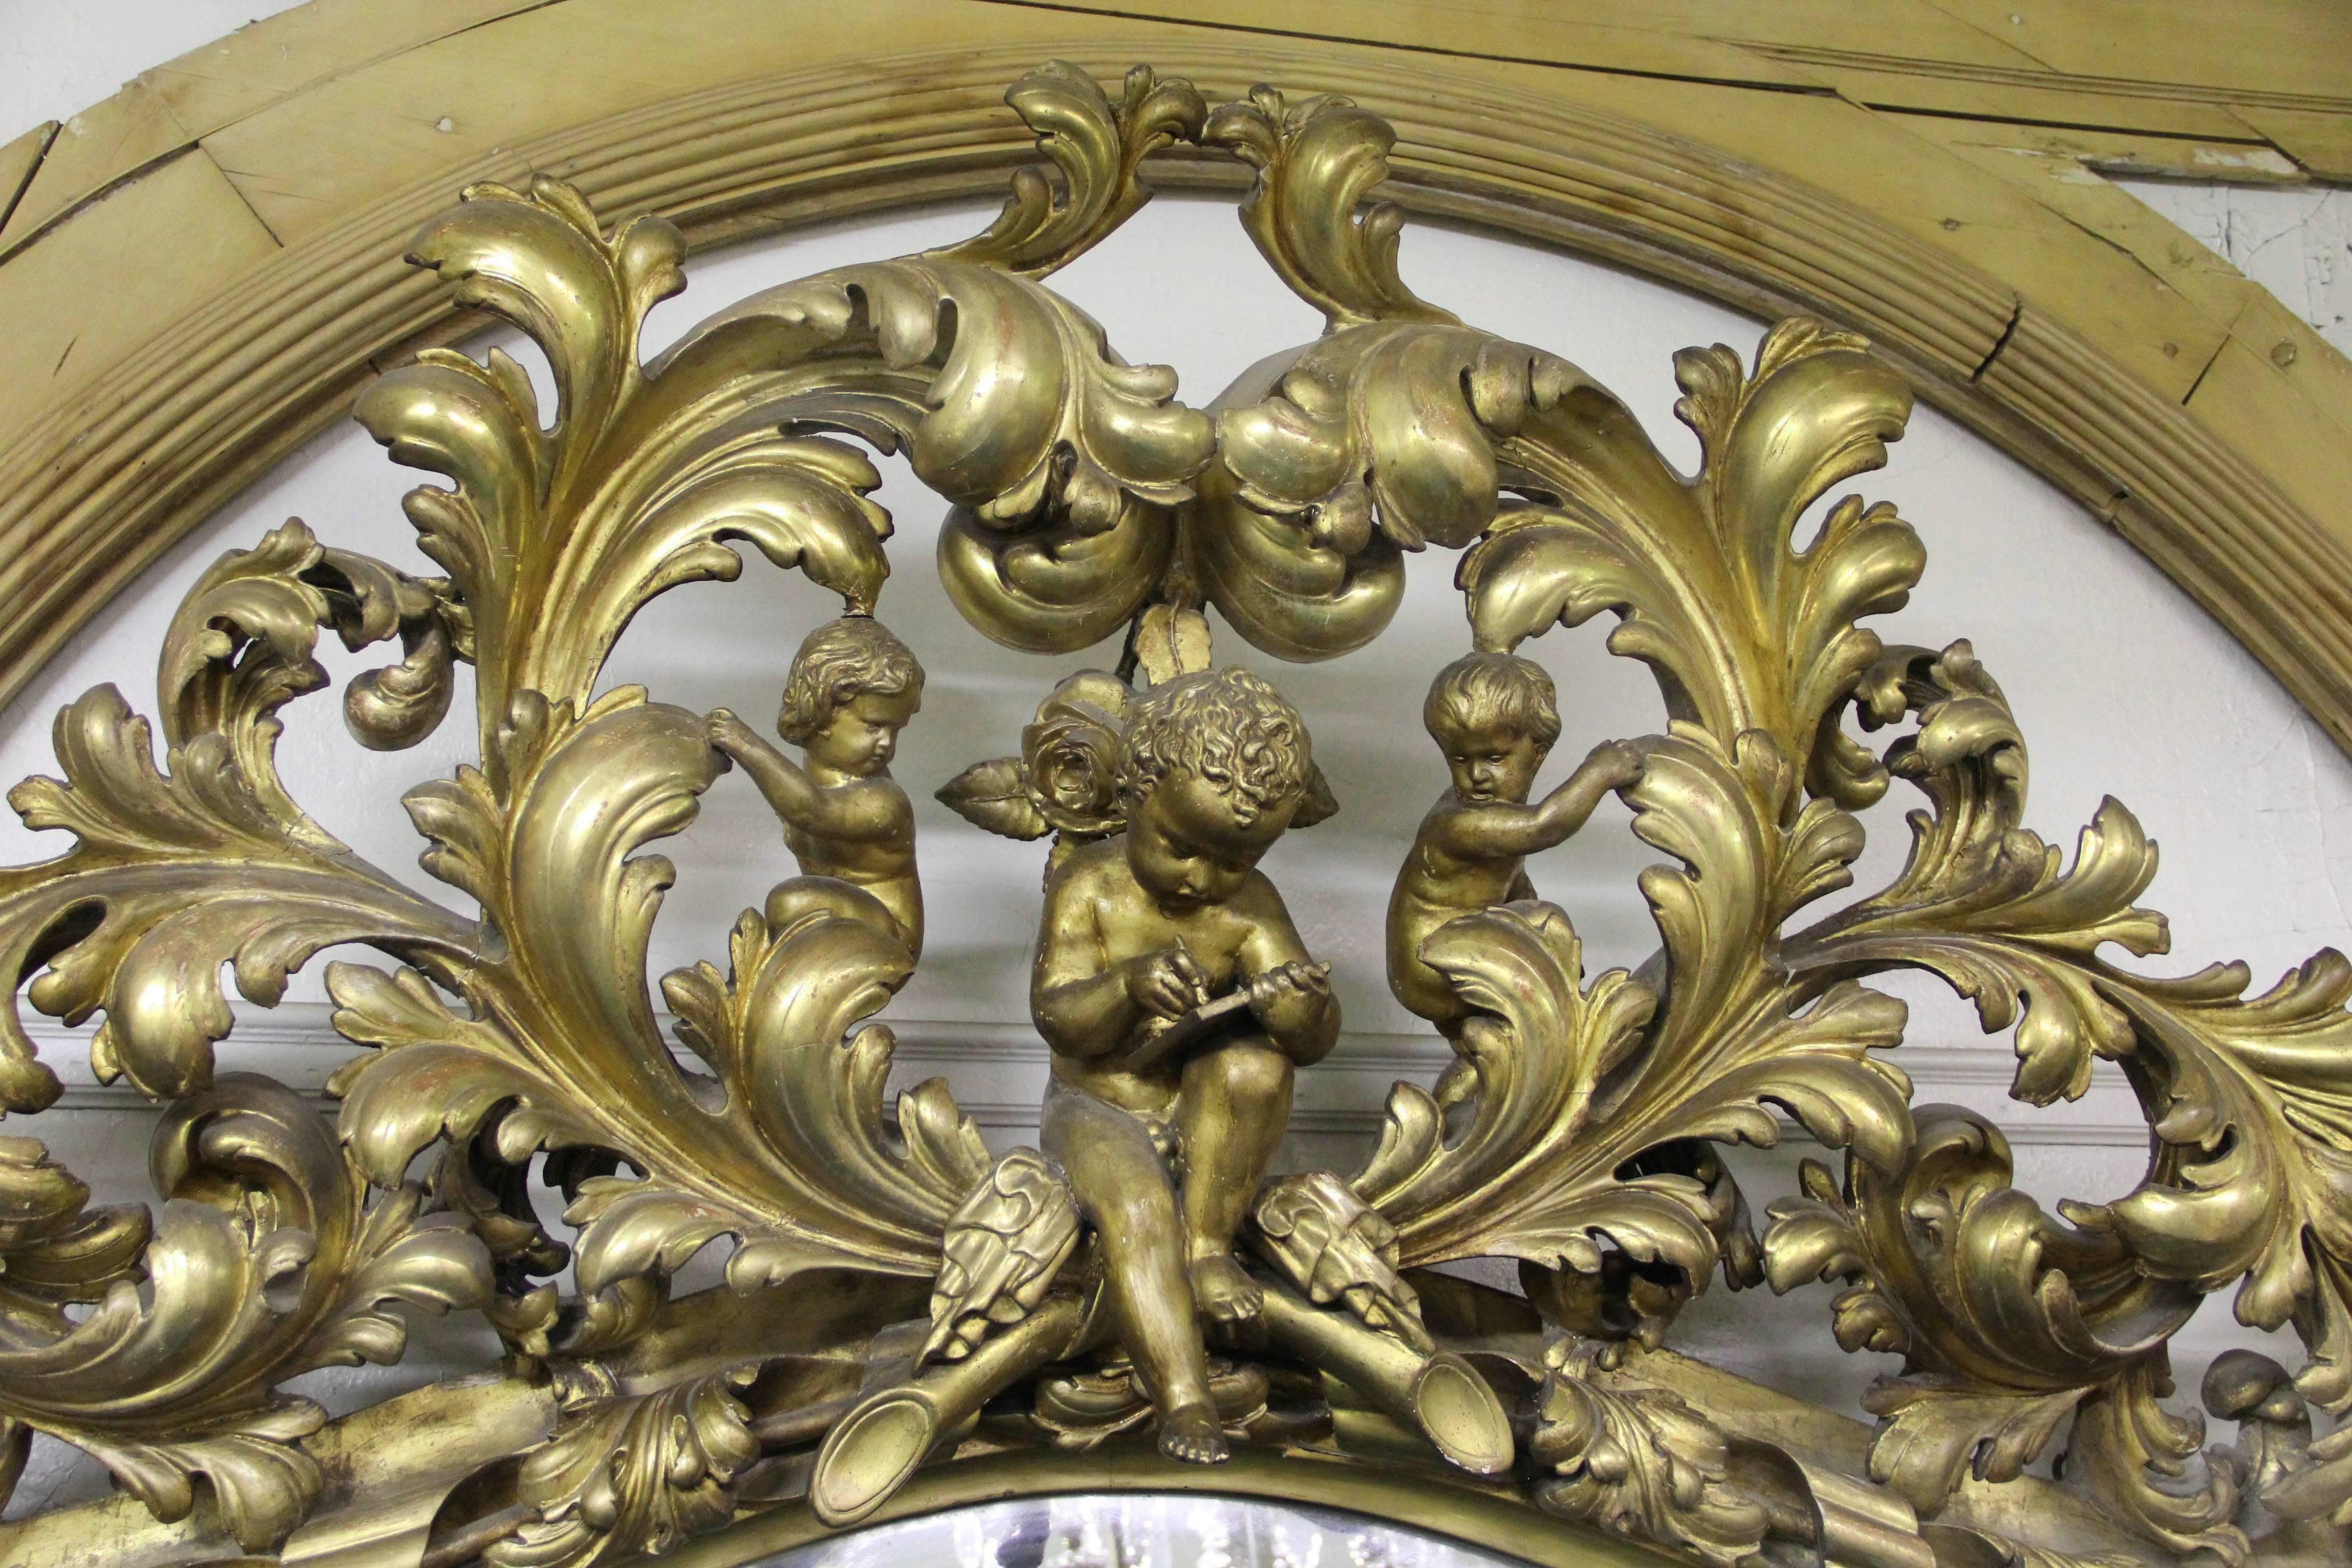 A very important late 19th century Rococo style giltwood and gesso mirror.

The entire frame exceptionally carved with heavy detail. The top centered with a large carved cherub and two putti surrounded by flowers and foliage.